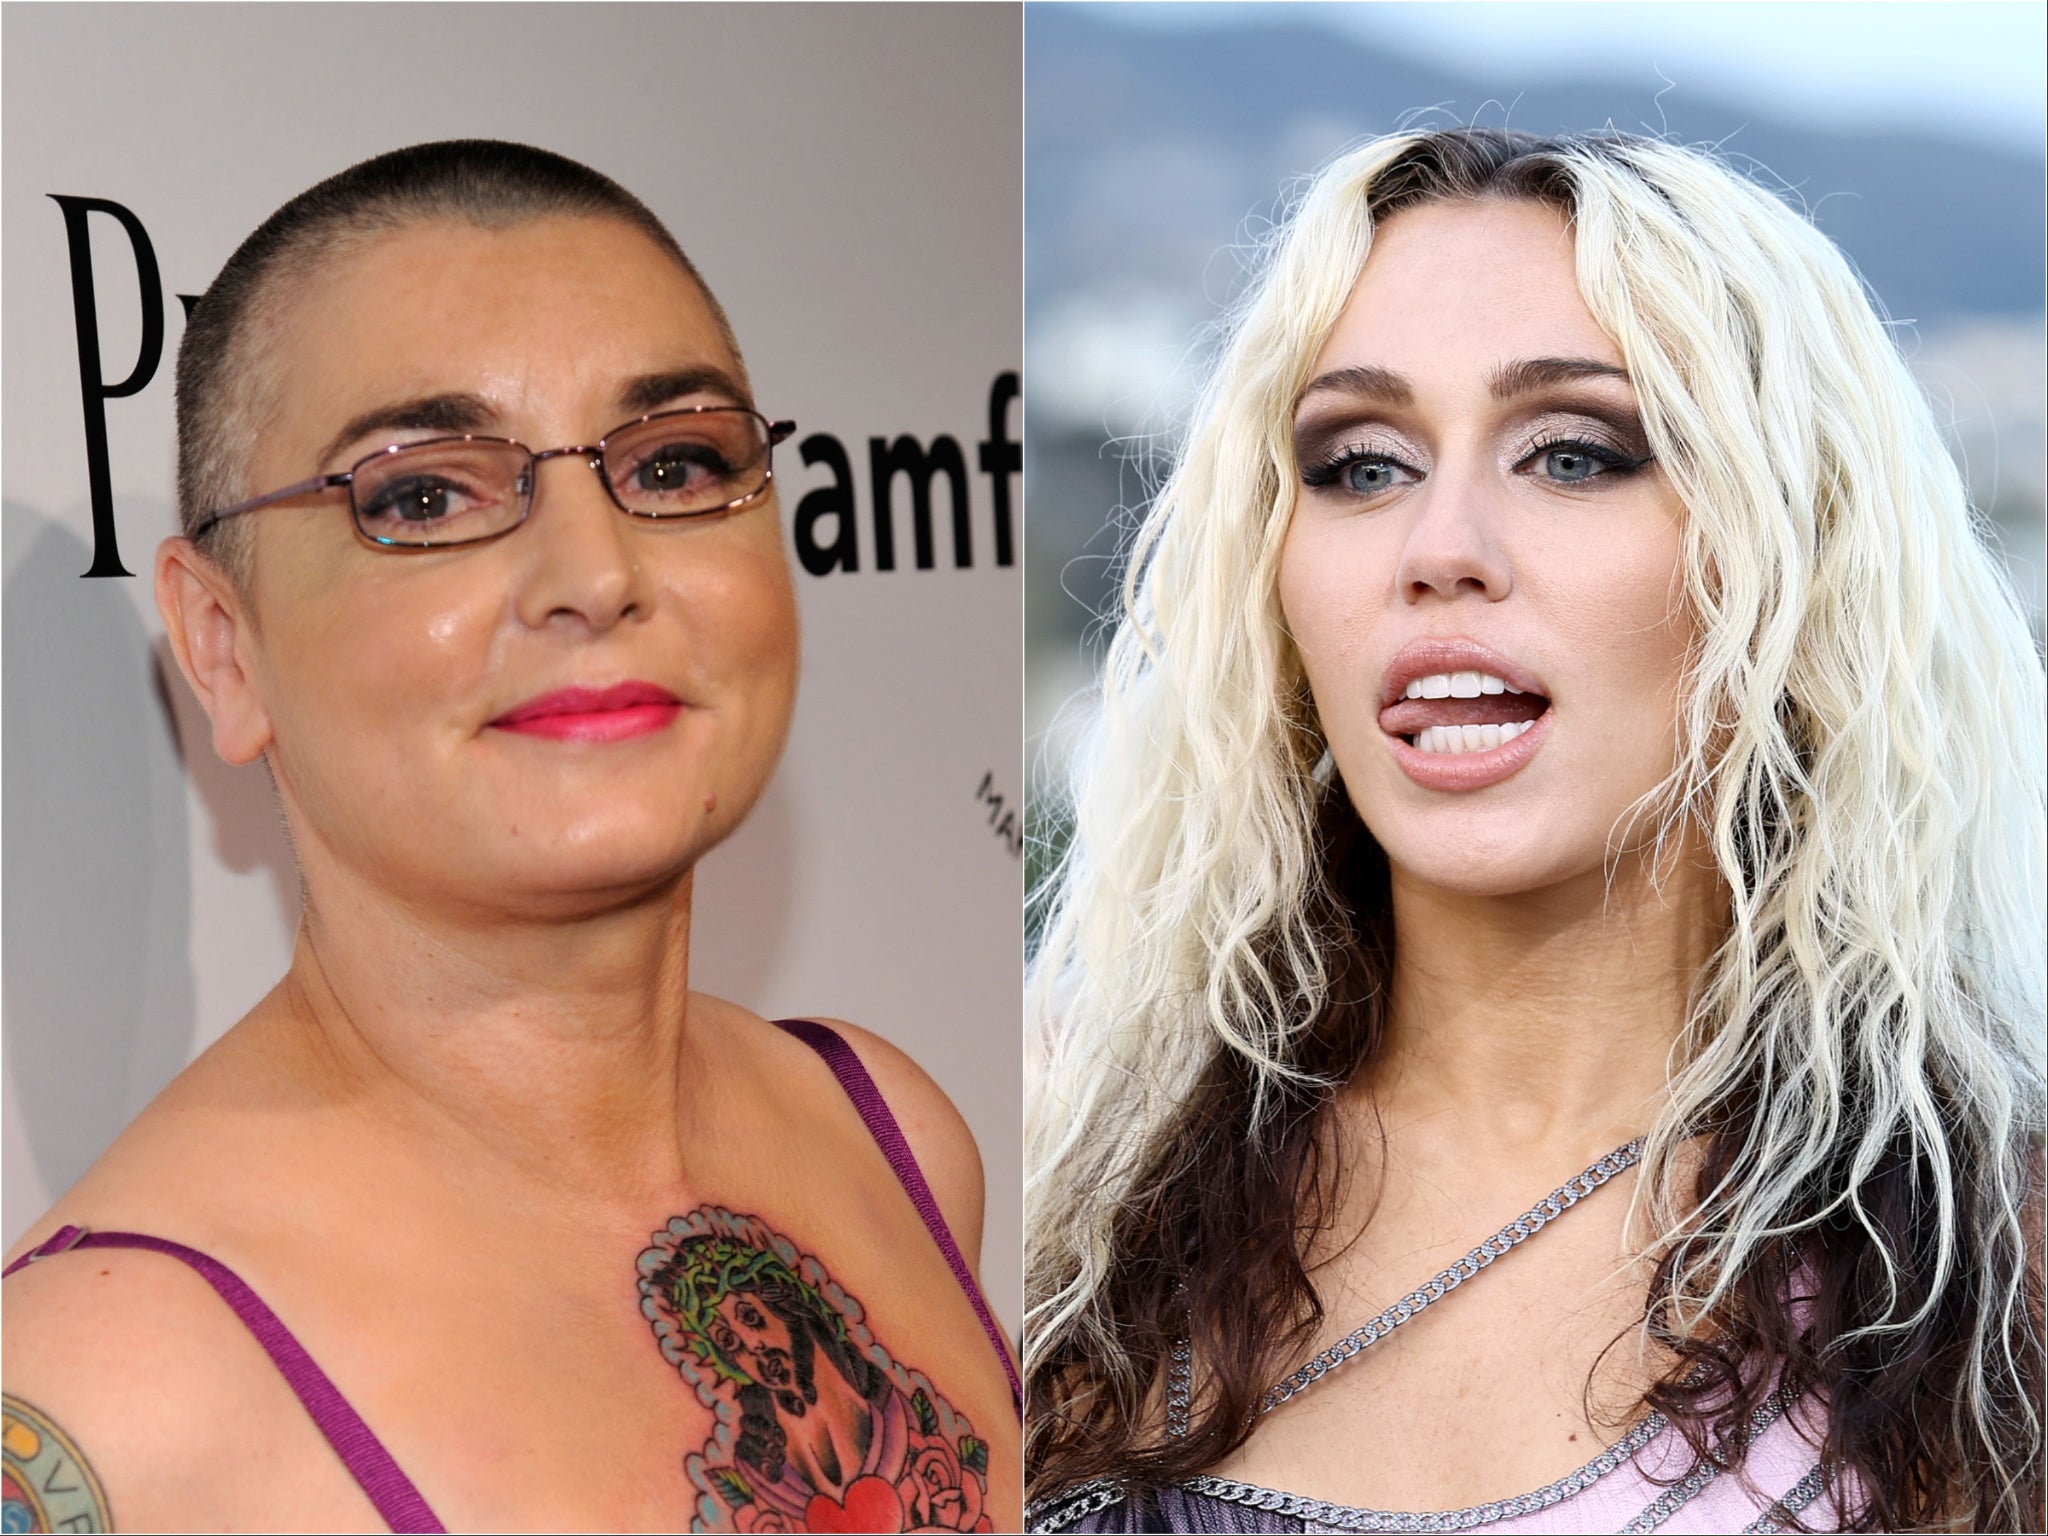 Sinead O’Connor (left) and Miley Cyrus